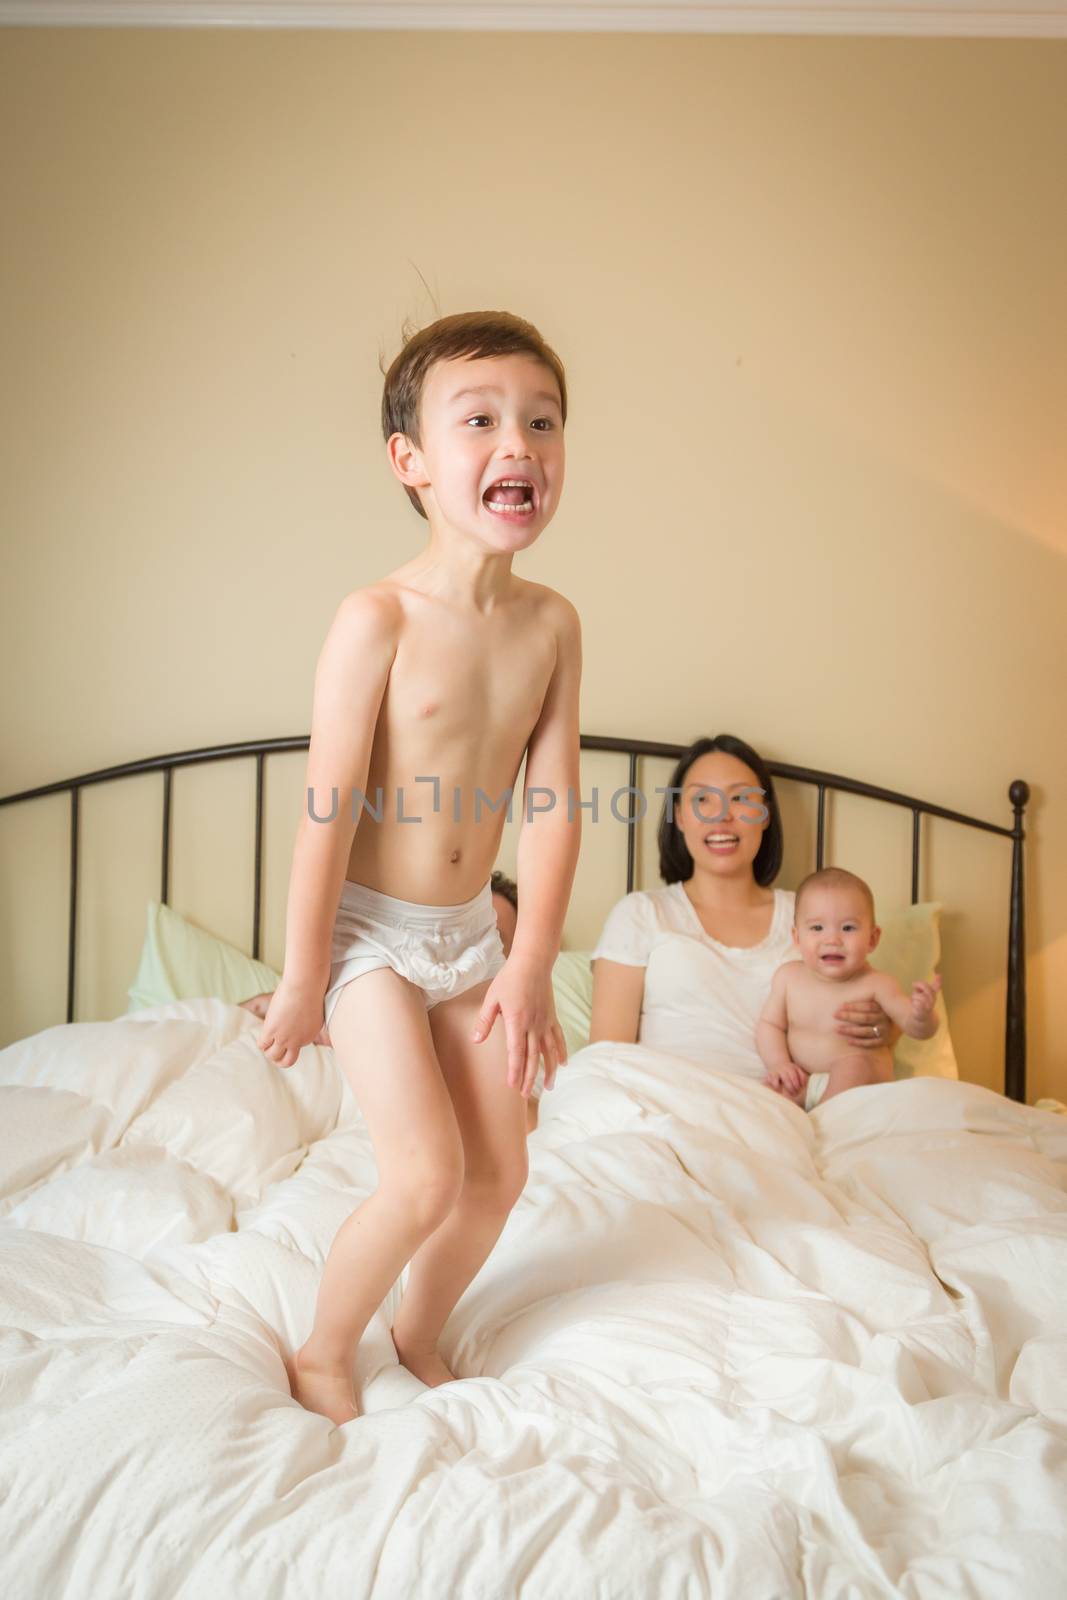 Mixed Race Chinese and Caucasian Boy Jumping In Bed with His Fam by Feverpitched